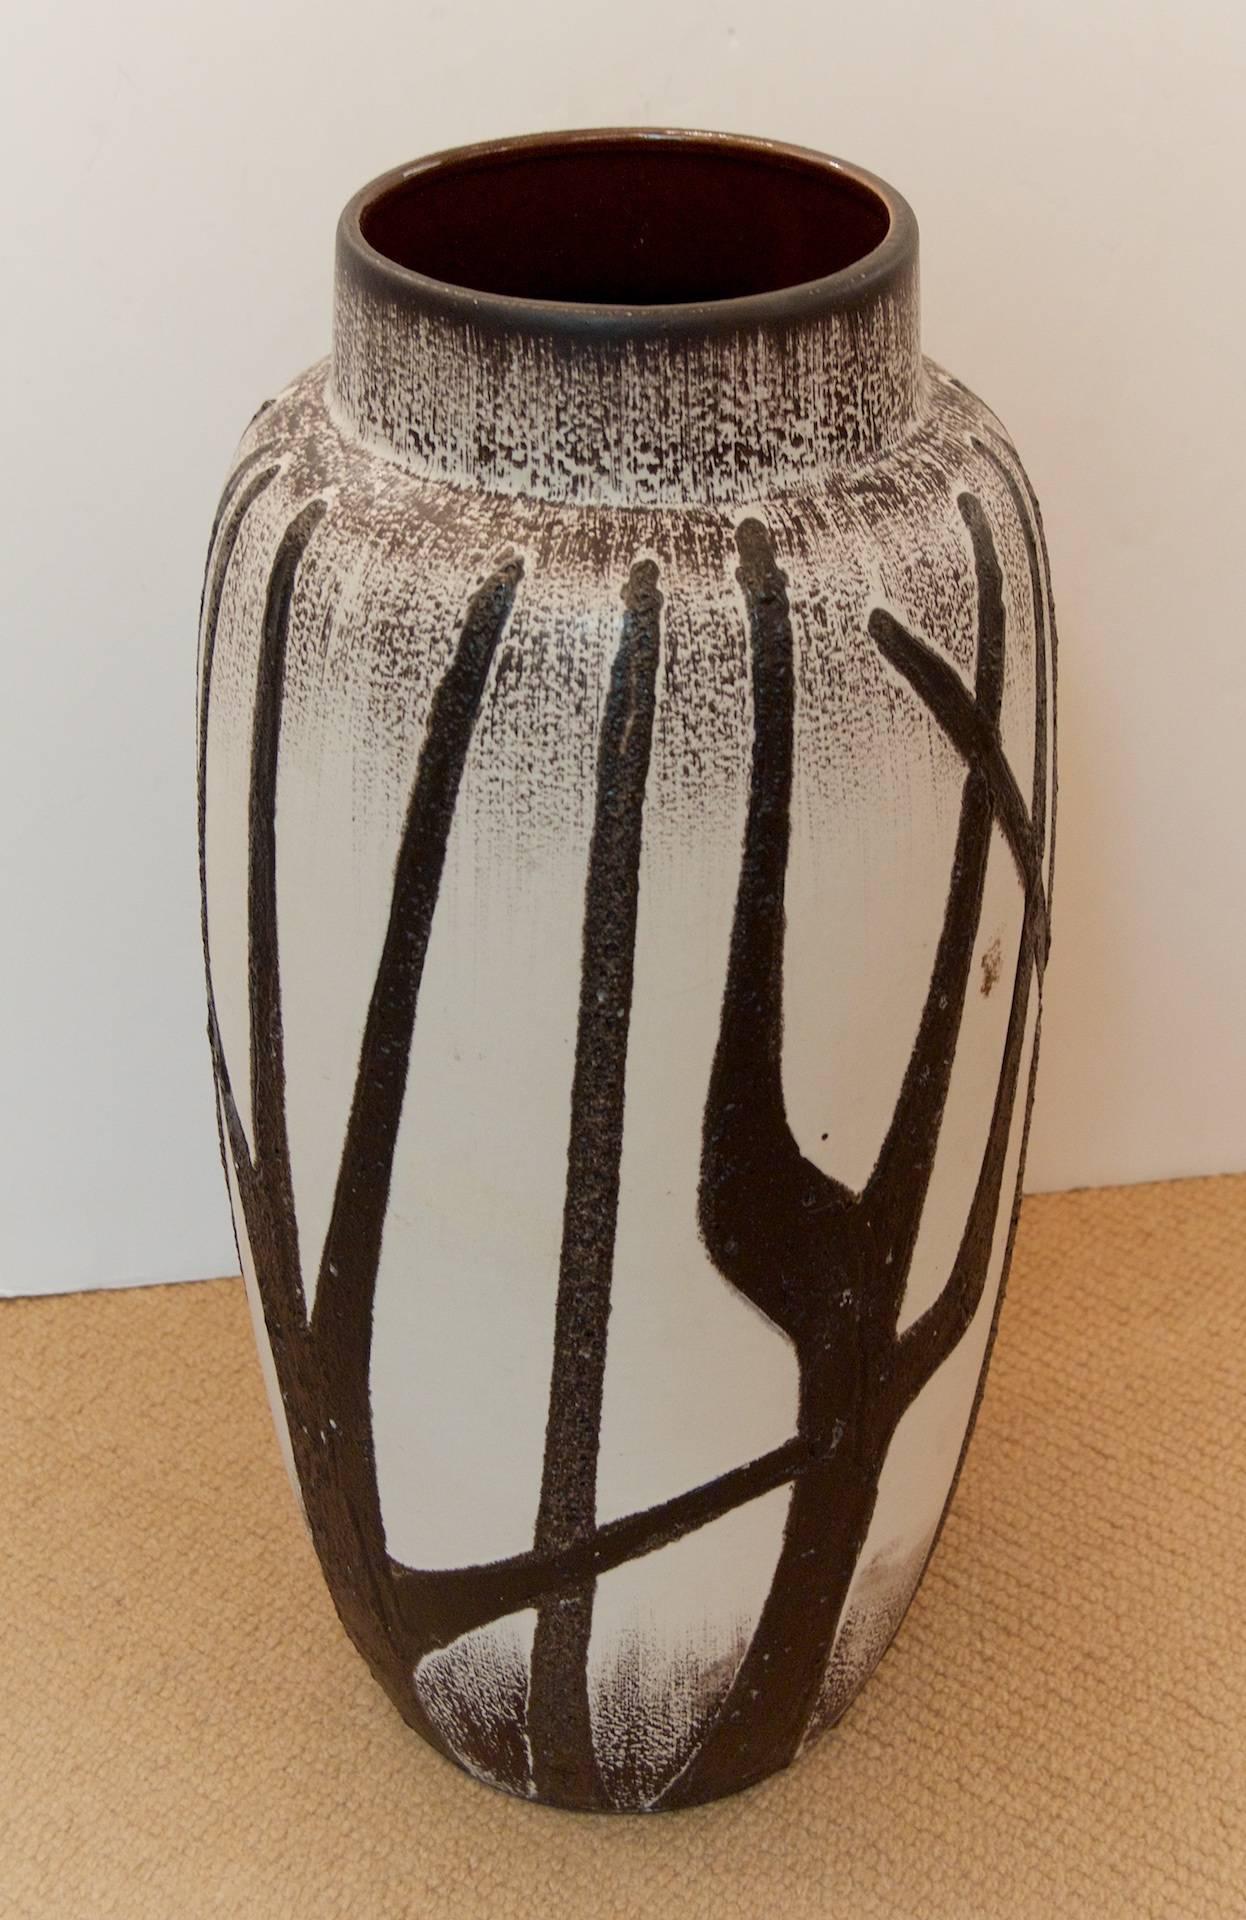 A well sized vase made by Scheurich Keramik. Layering of matte brown glaze underneath a cream semi gloss leaving tree form shapes. Would also serve as an umbrella stand.

Opening is 6 inches. Please see other listings for other patterns and sizes.